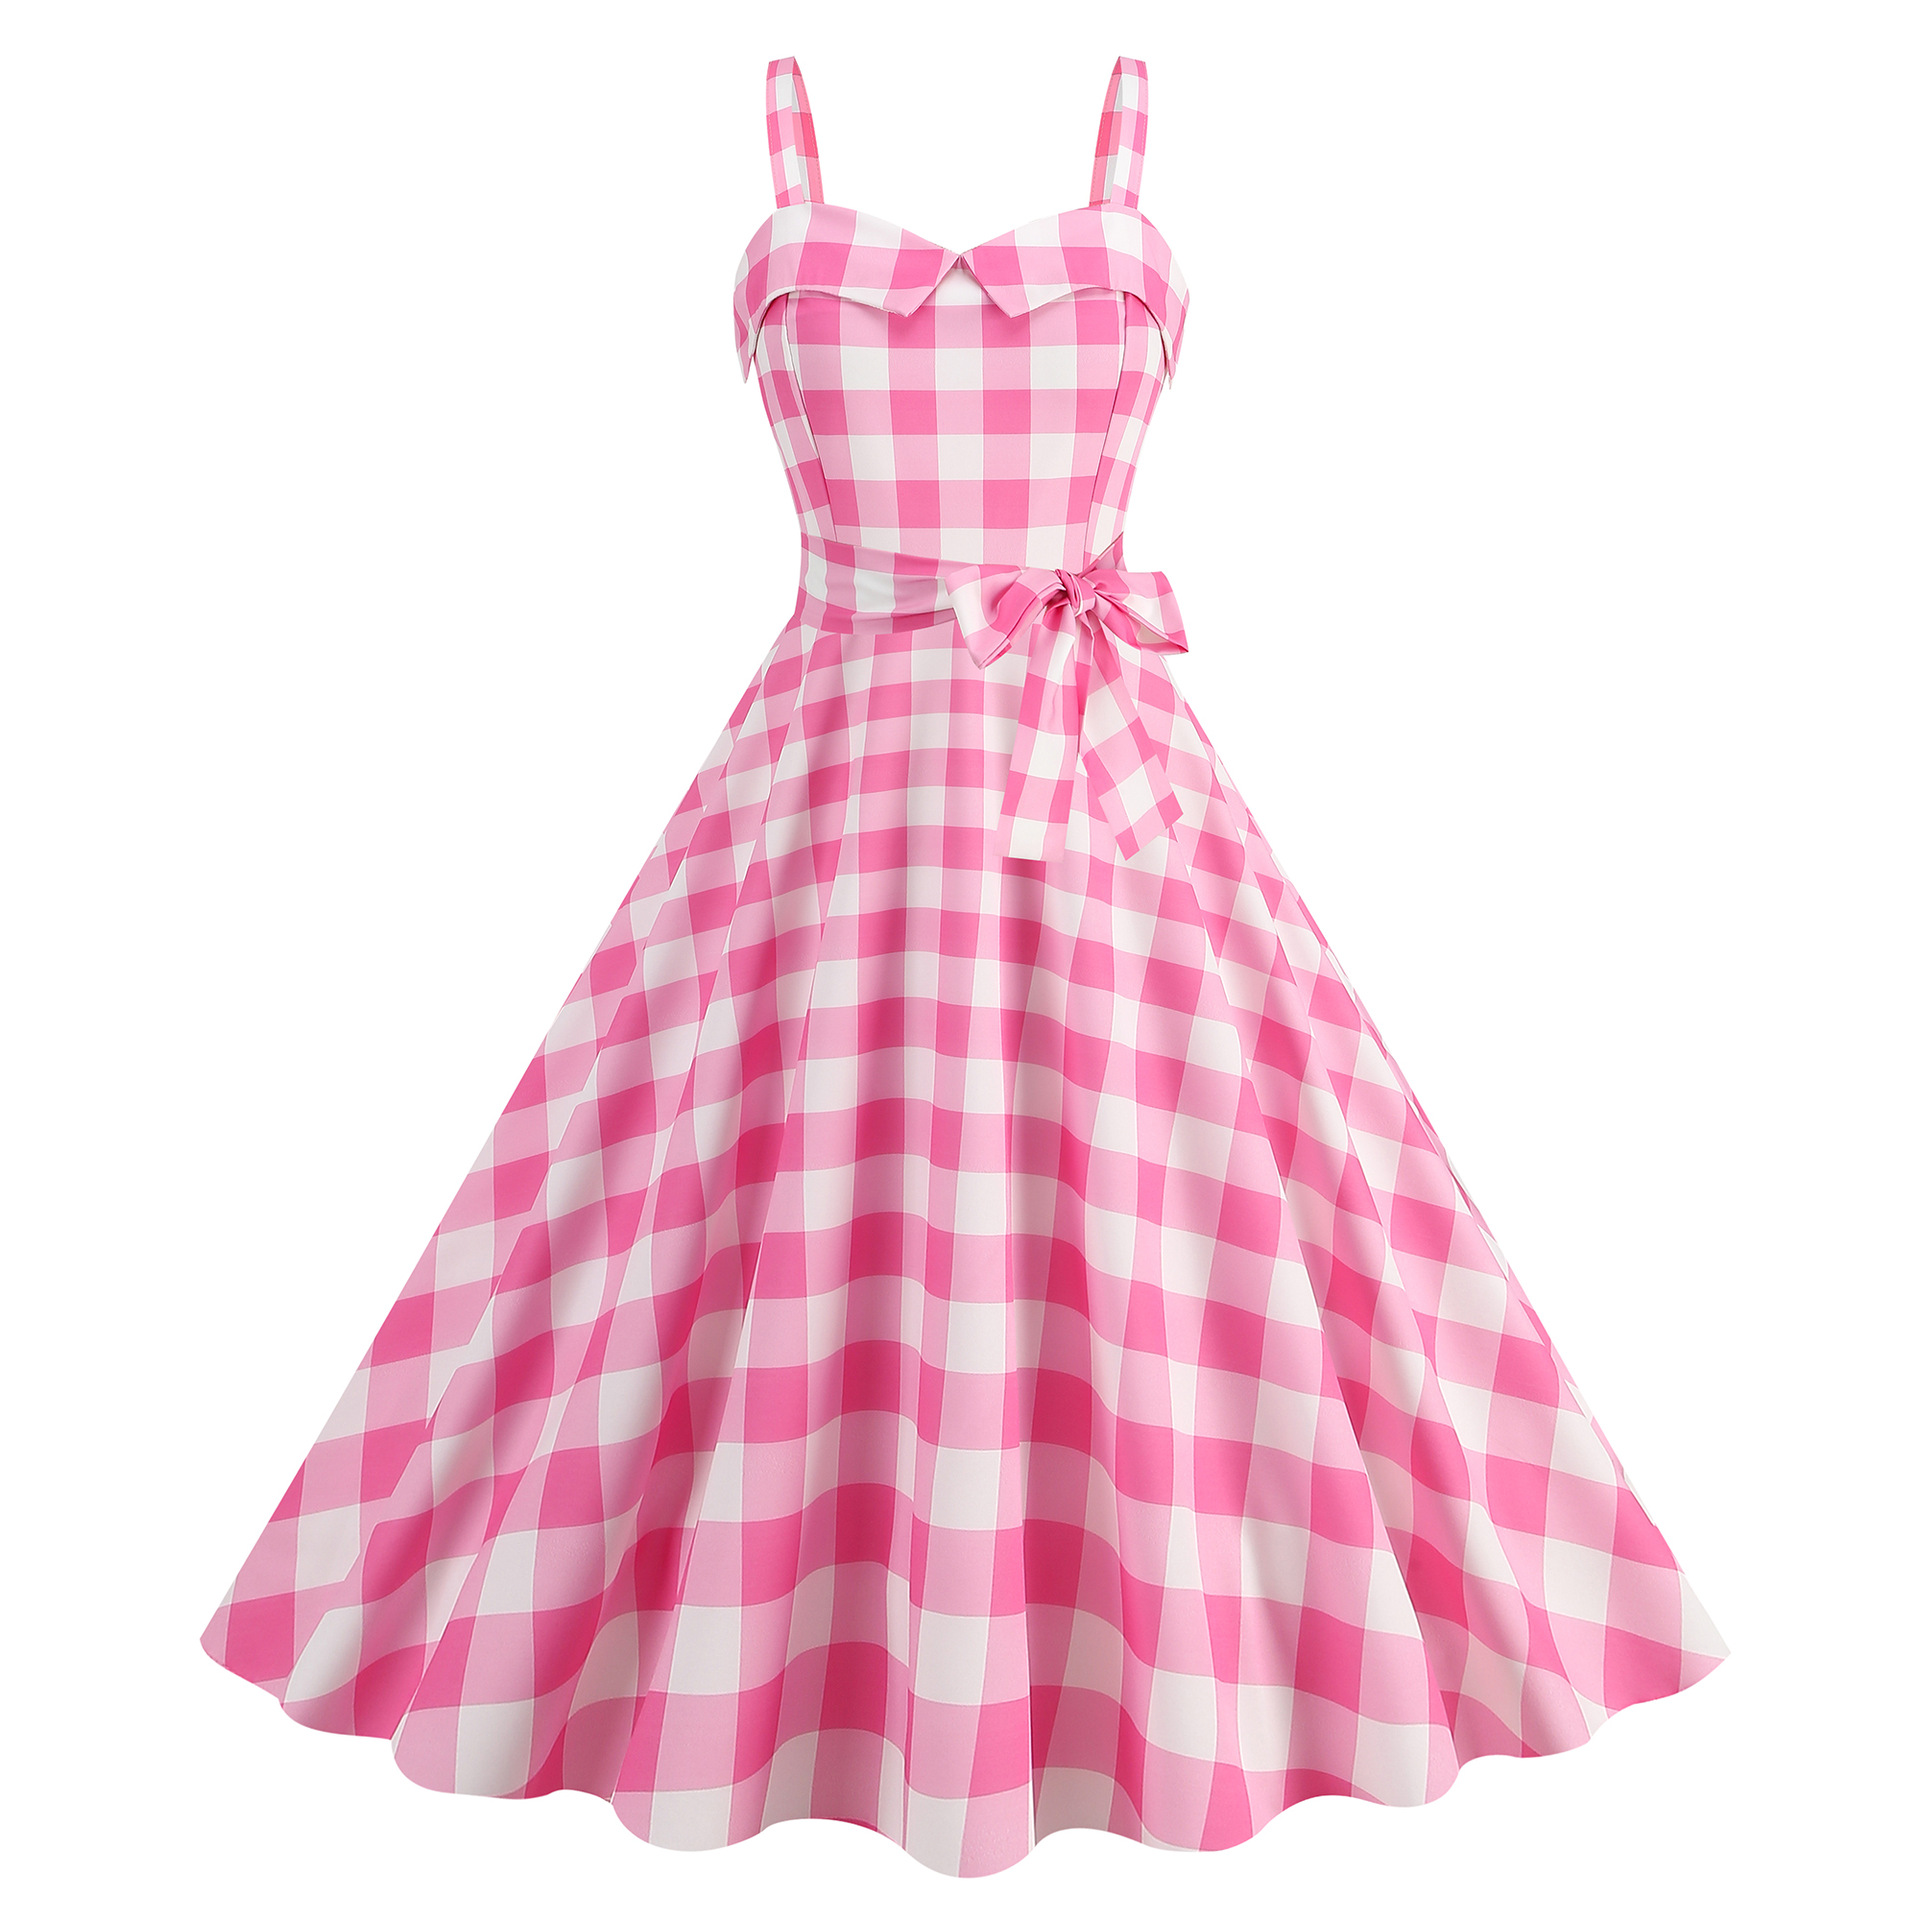 Factory Supply Large Quantity in Stock Hot Sale Barbie Pink Sling Party Casual Polka Dot Plaid Printed Dress